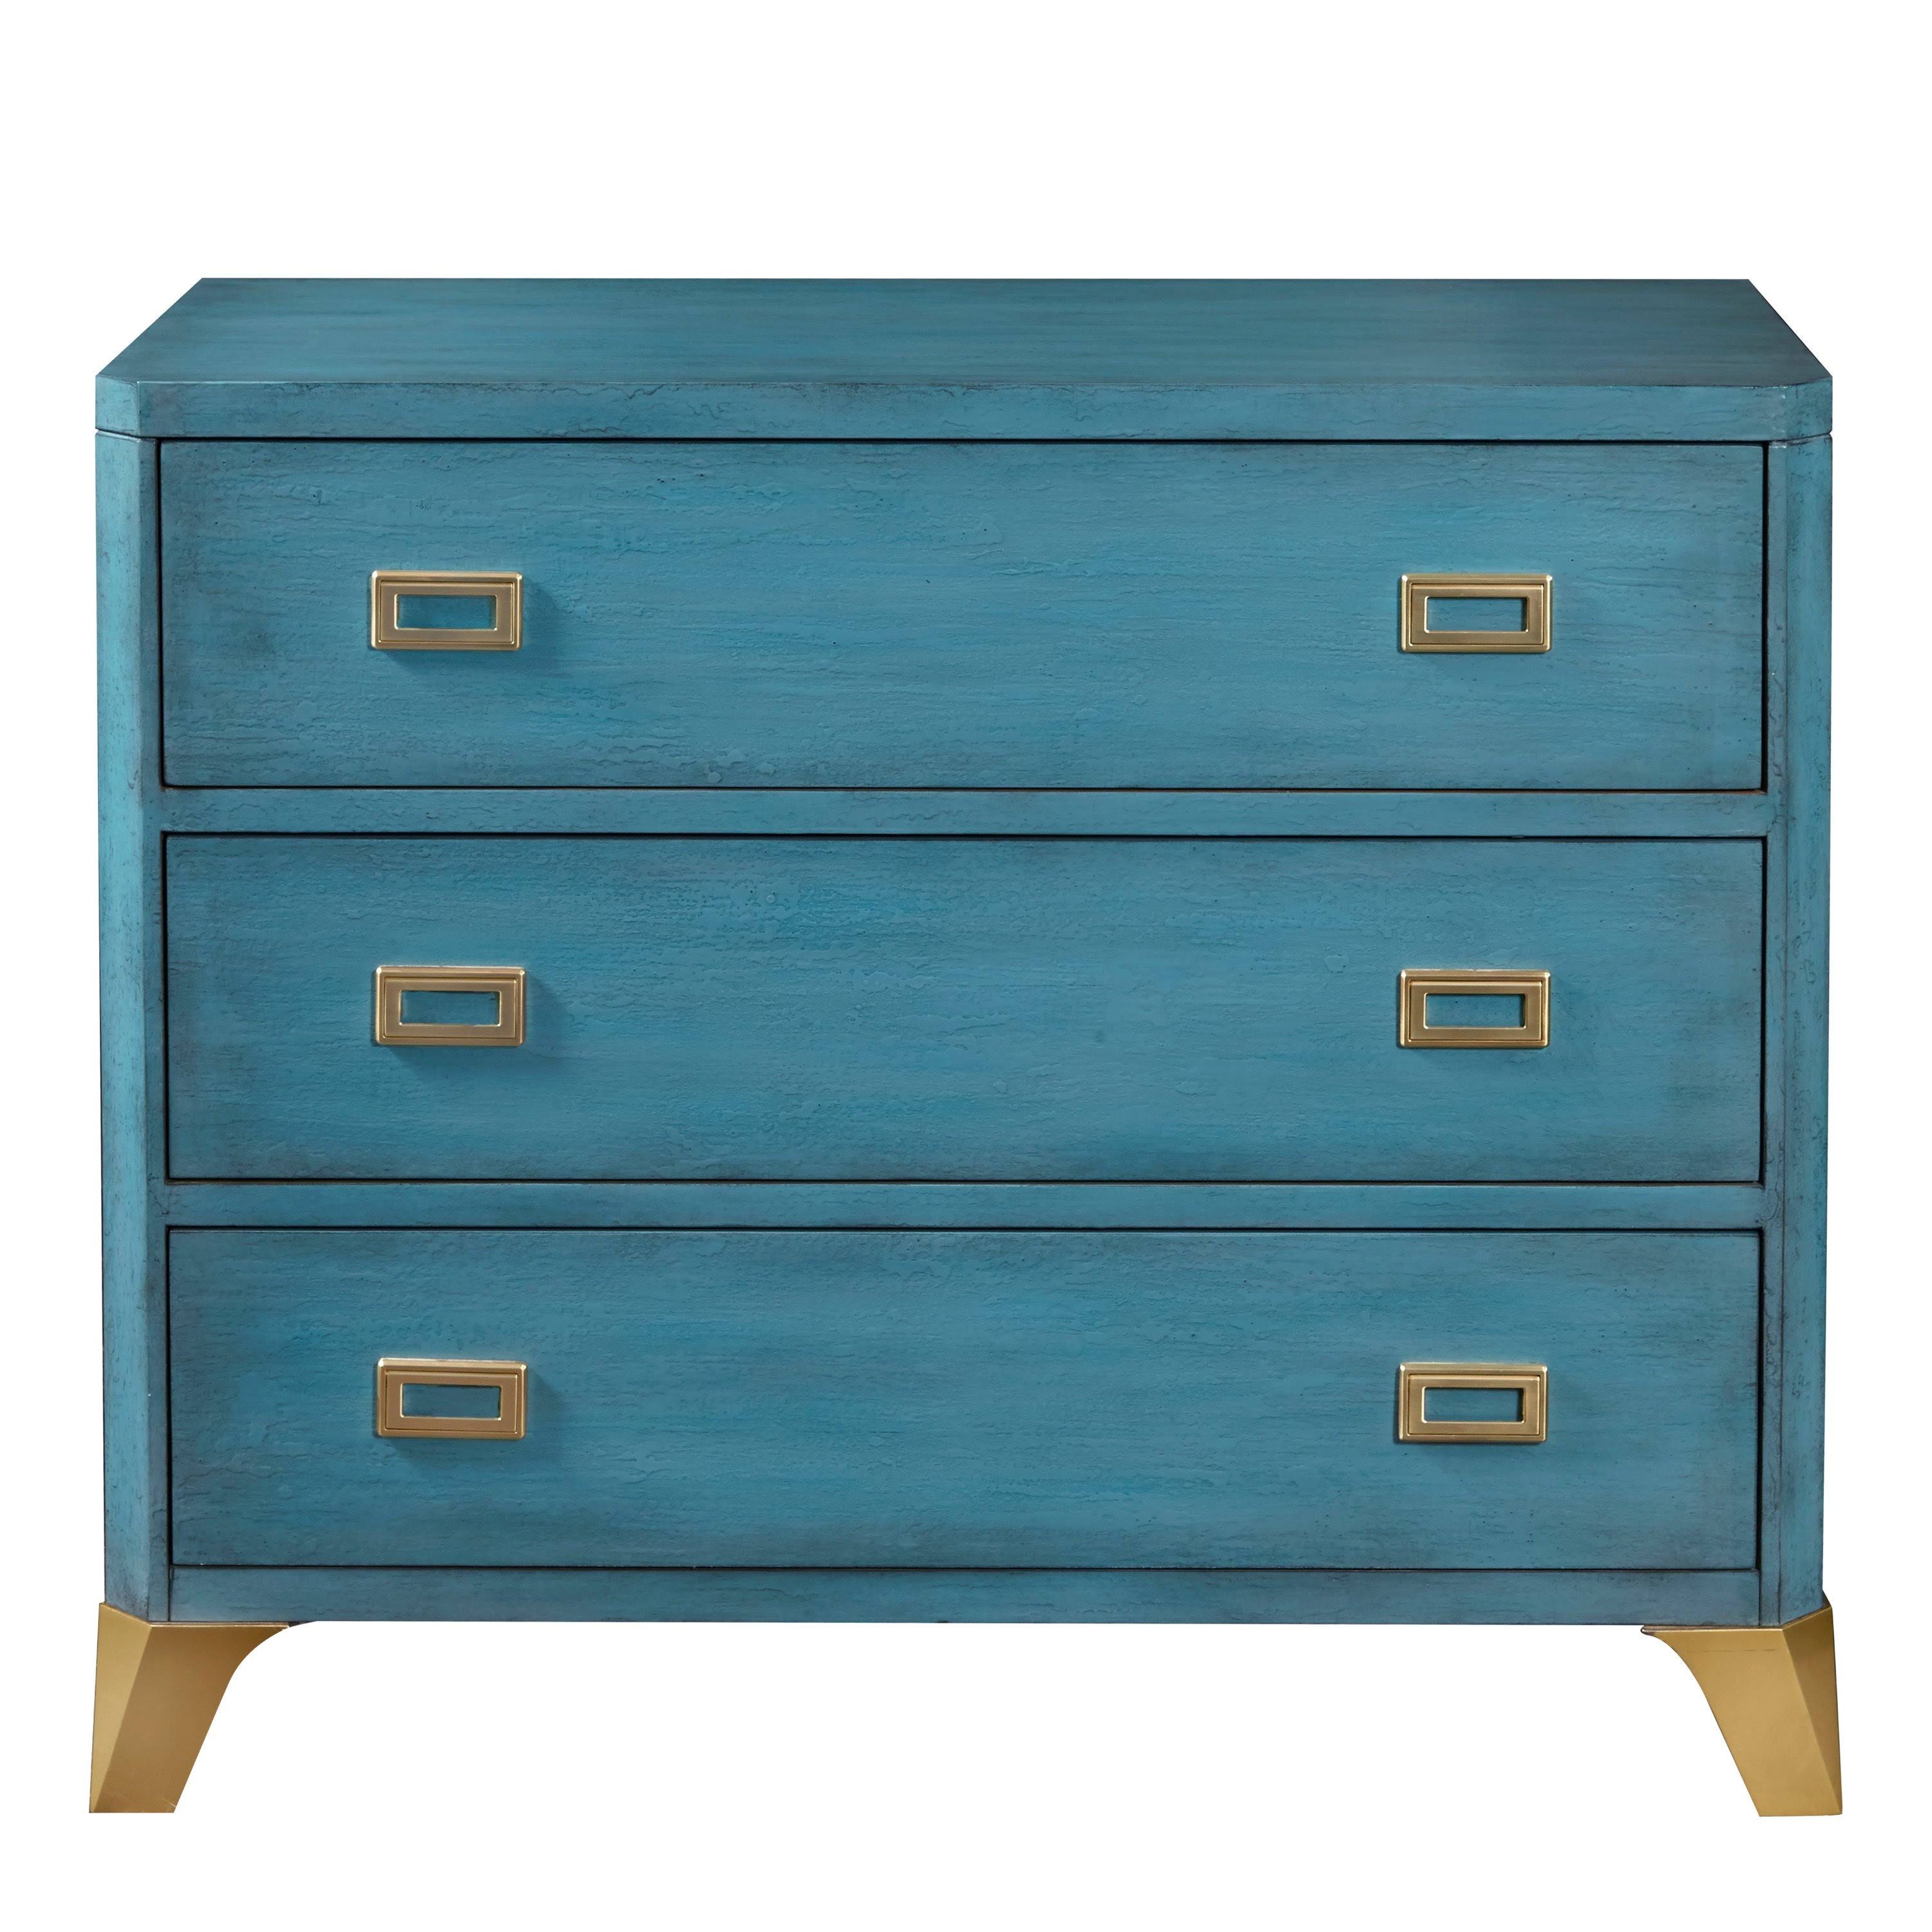 Teal Dresser with Three Spacious Drawers | Image